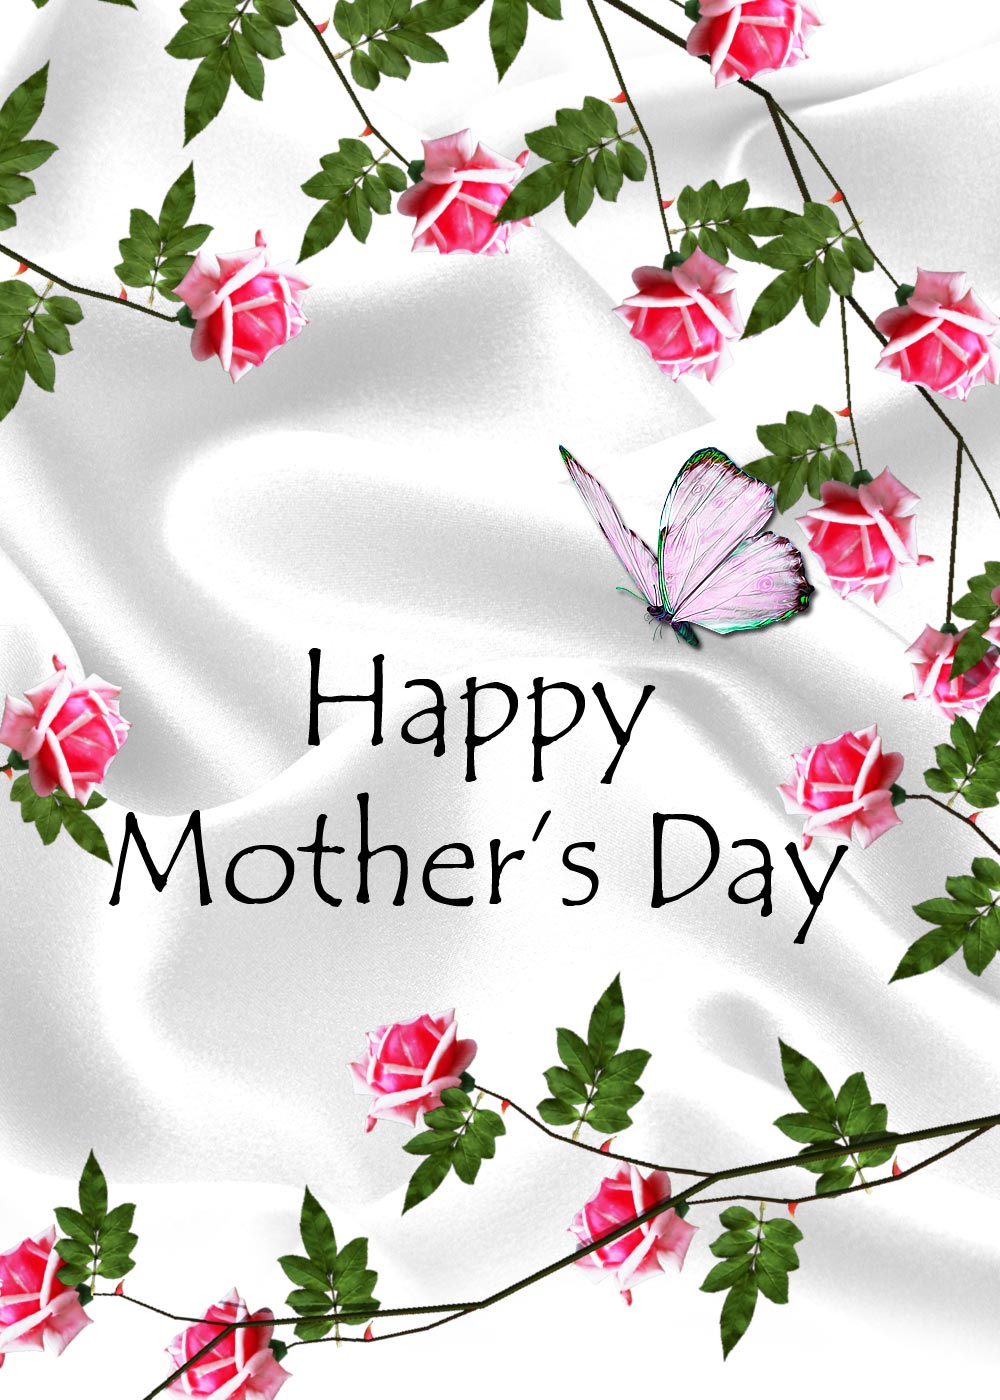 Free Mothers Day Greeting Cards Download